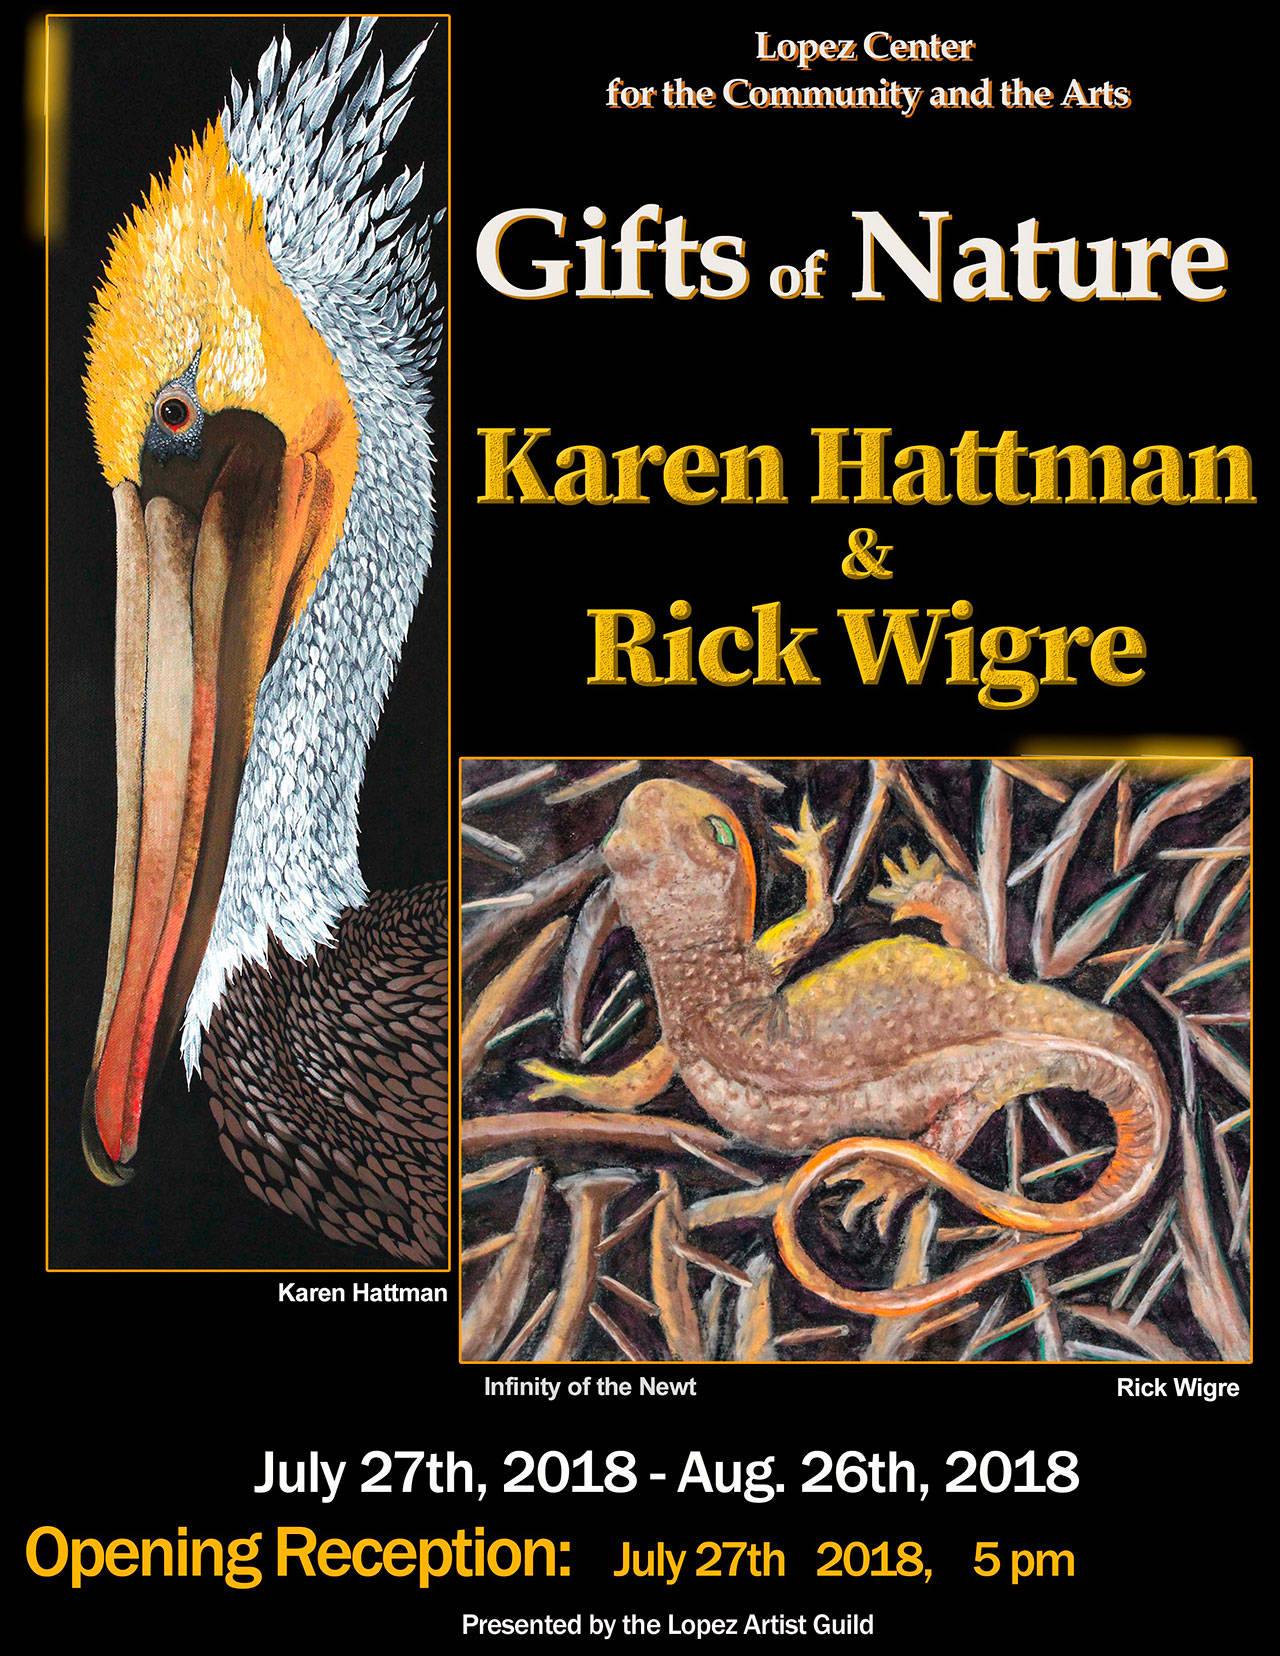 Lopez Center presents ‘Gifts of Nature’ exhibition, July 27